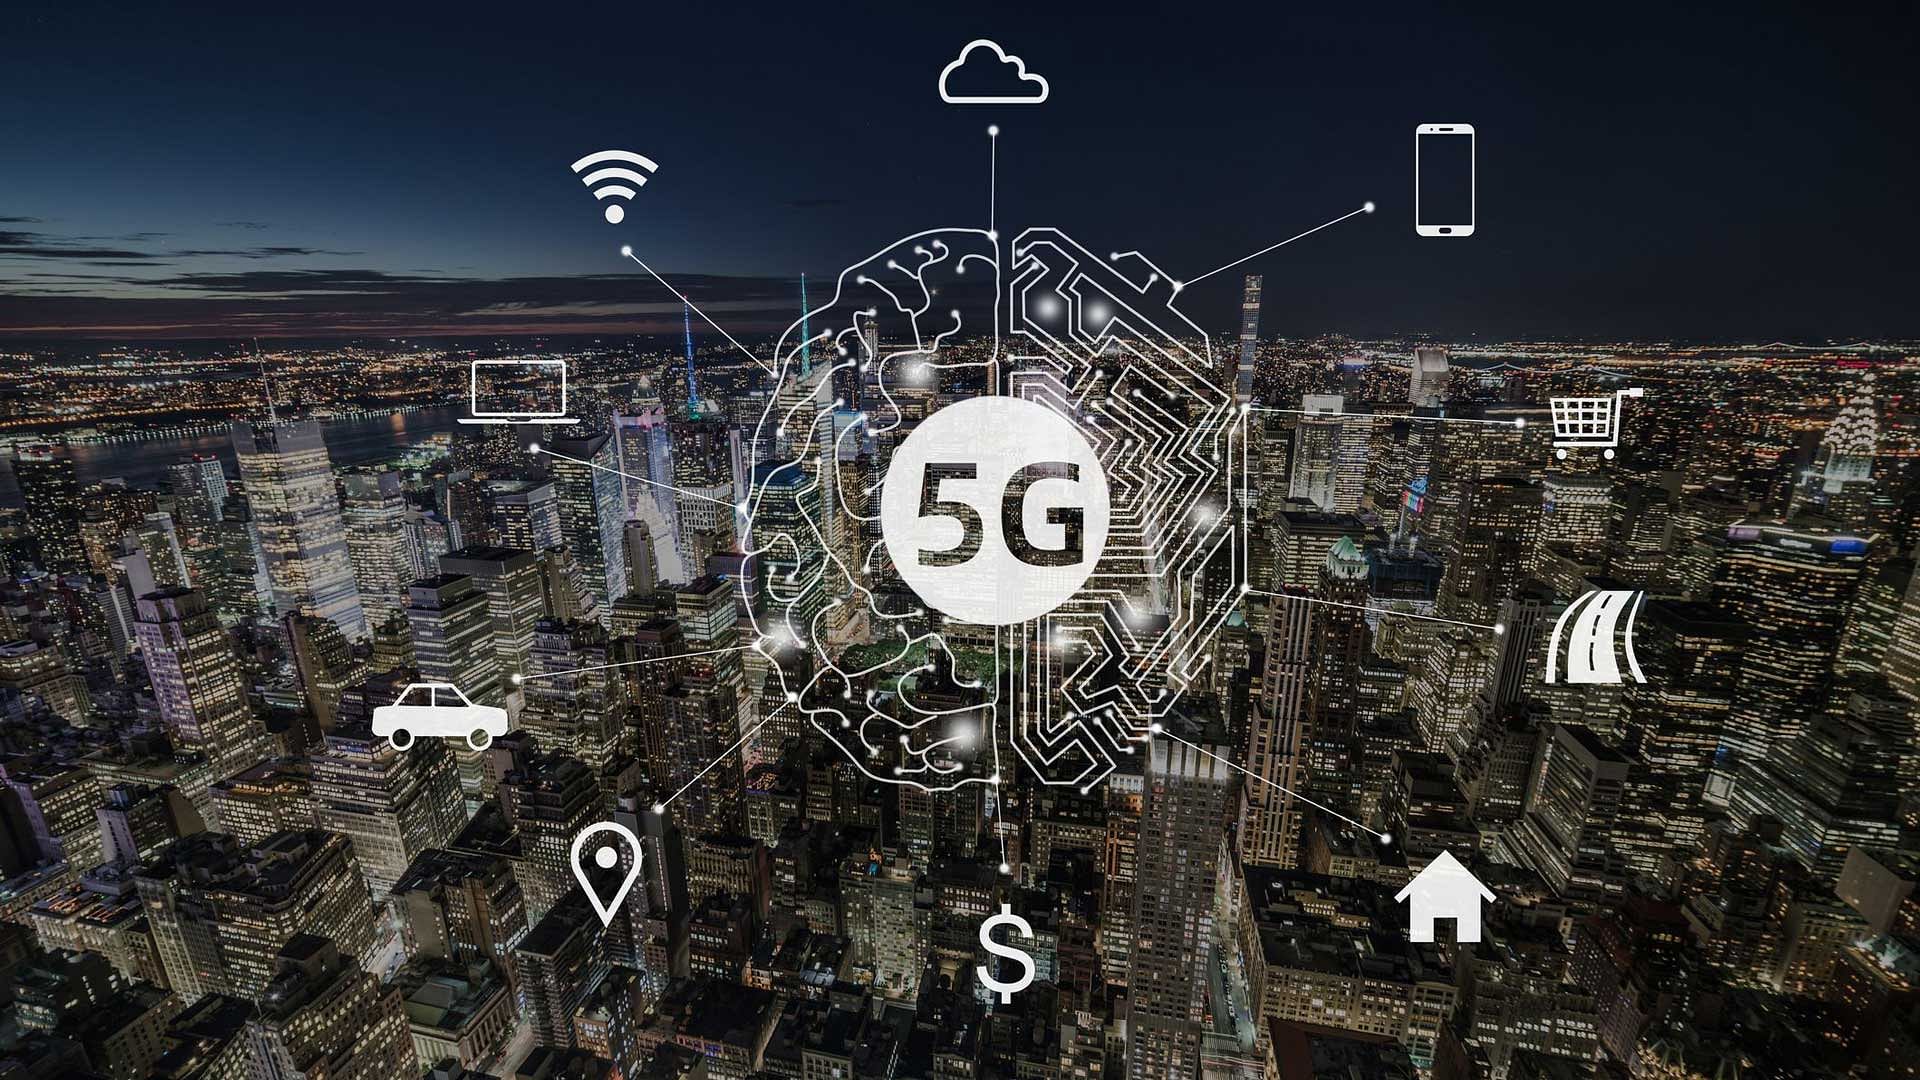 5G is a technology that could speed up communications, but it has its own challenges.